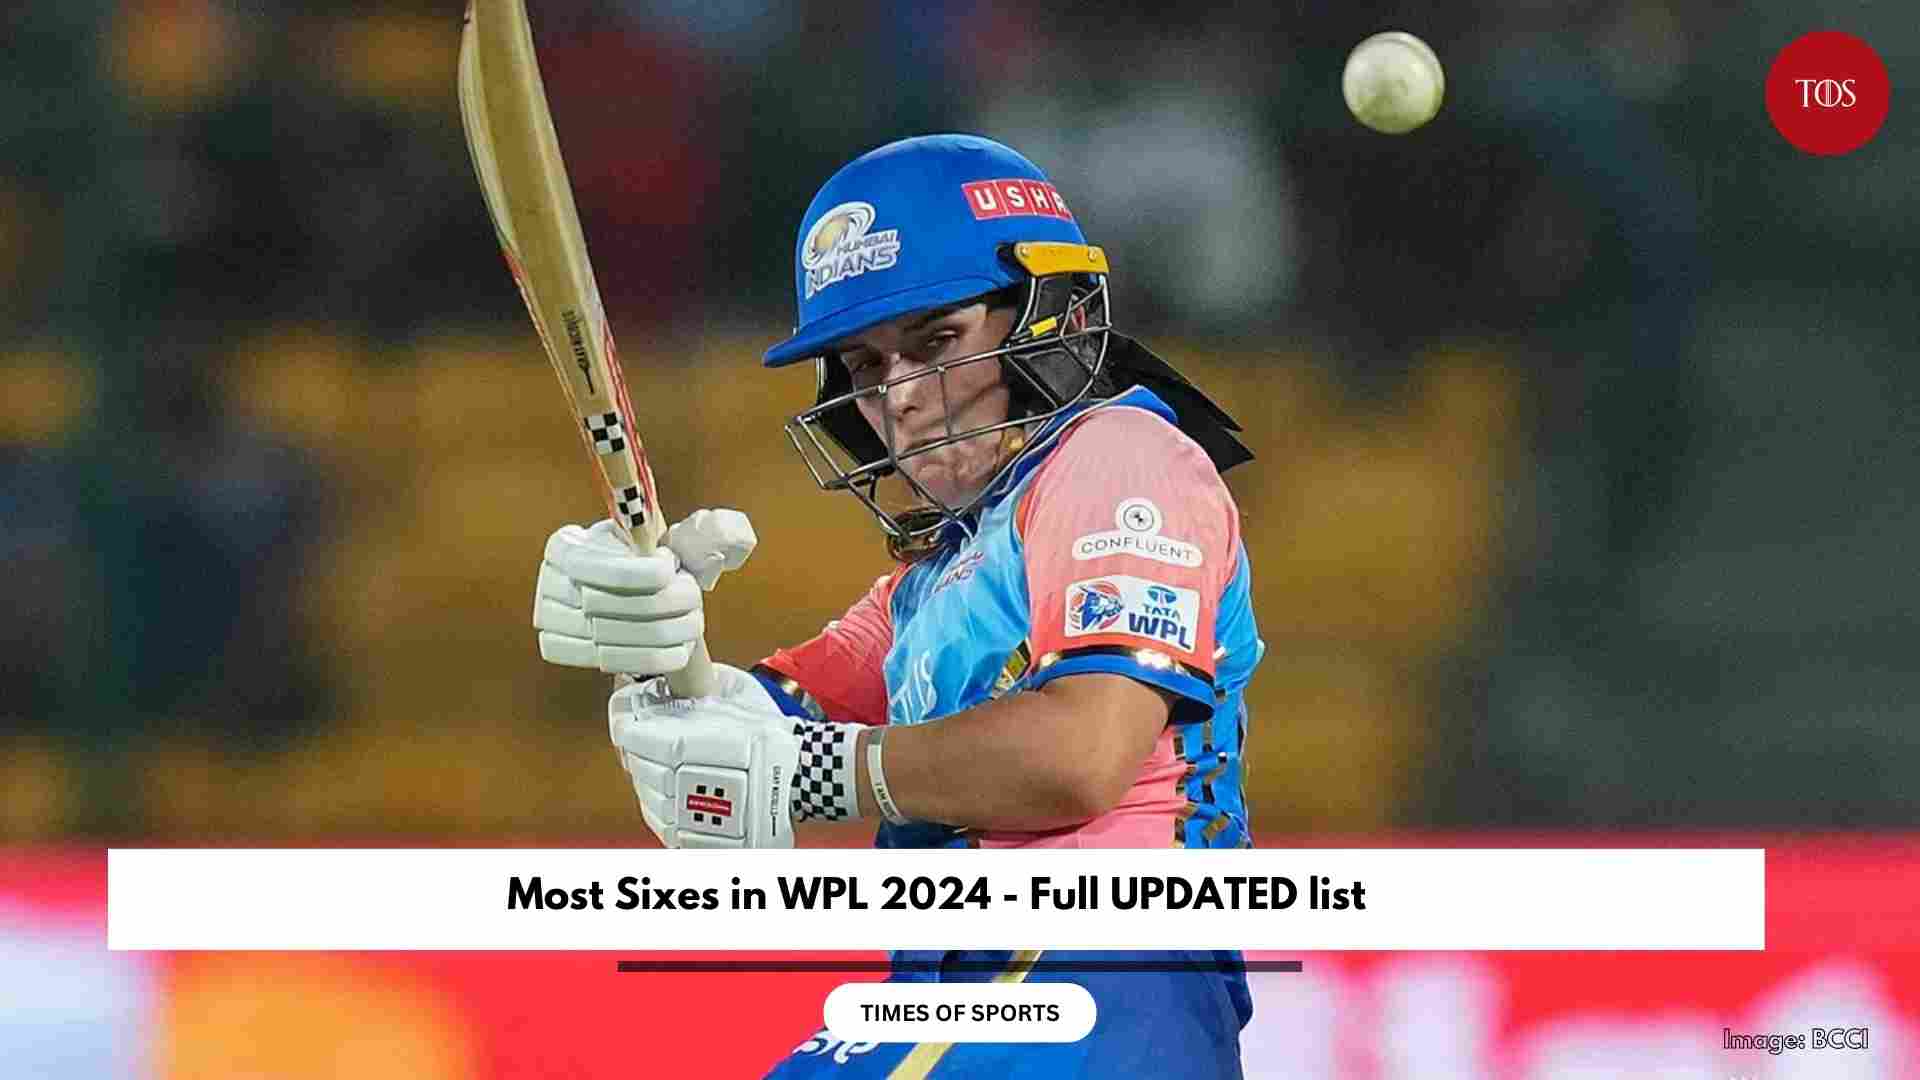 Most Sixes in WPL 2024